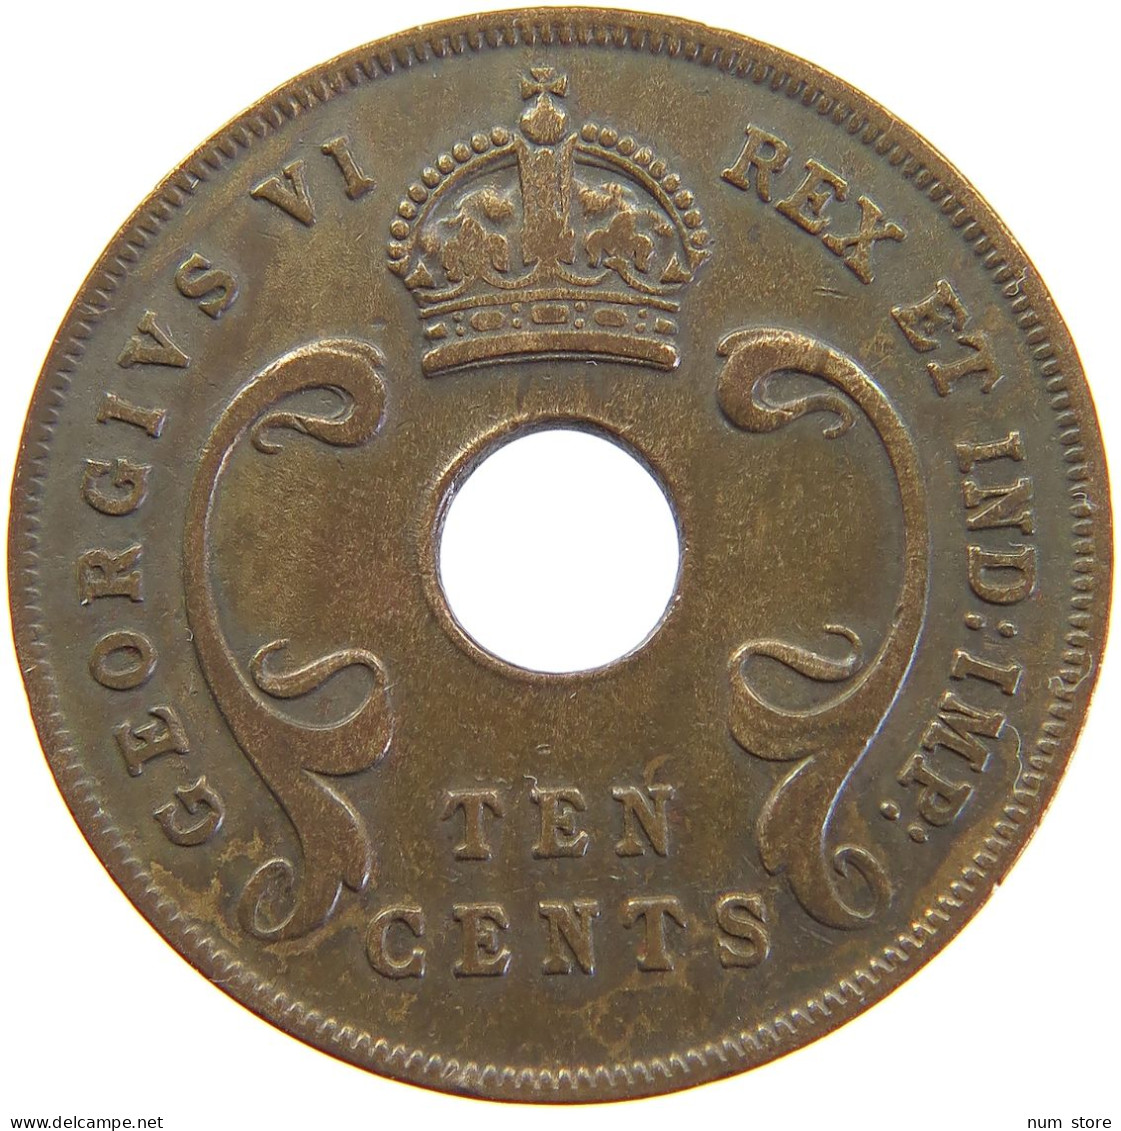 EAST AFRICA 10 CENTS 1941 GEORGE V. (1910-1936) #MA 067723 - British Colony